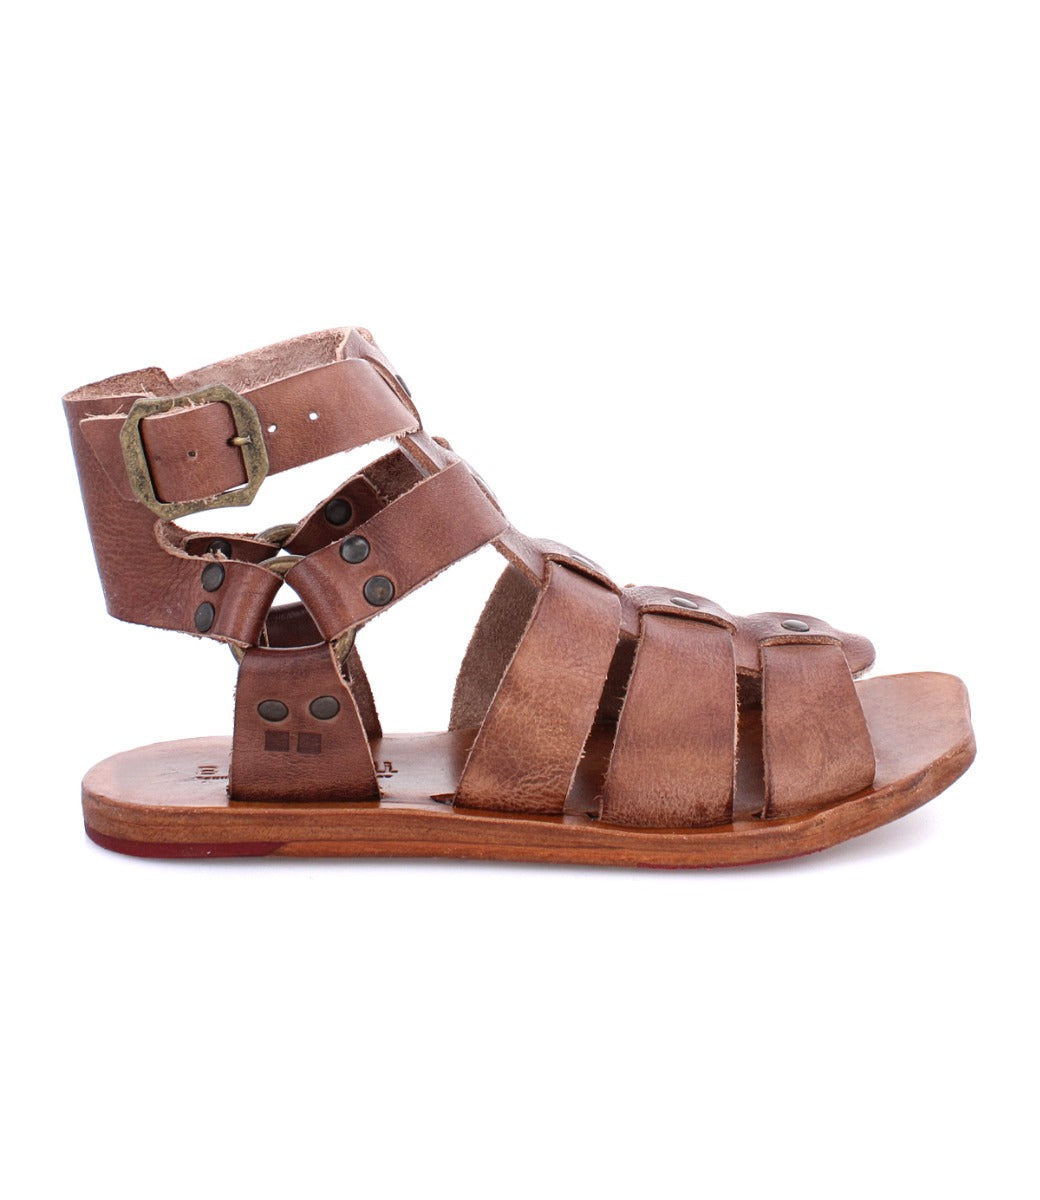 A women's Hera sandal with straps and buckles from the Bed Stu brand.